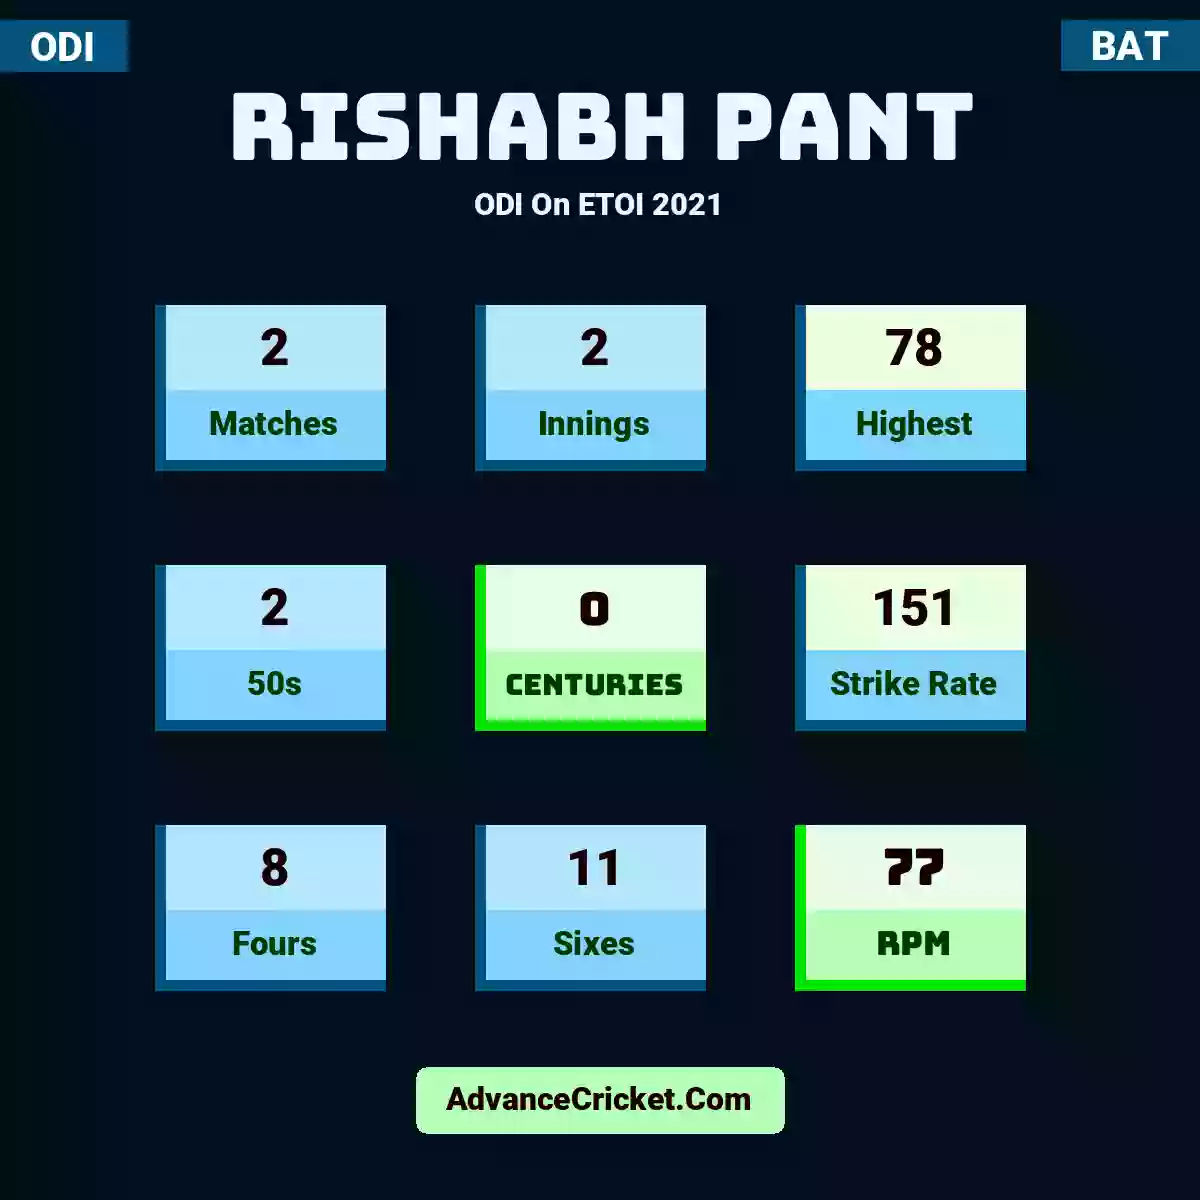 Rishabh Pant ODI  On ETOI 2021, Rishabh Pant played 2 matches, scored 78 runs as highest, 2 half-centuries, and 0 centuries, with a strike rate of 151. R.Pant hit 8 fours and 11 sixes, with an RPM of 77.